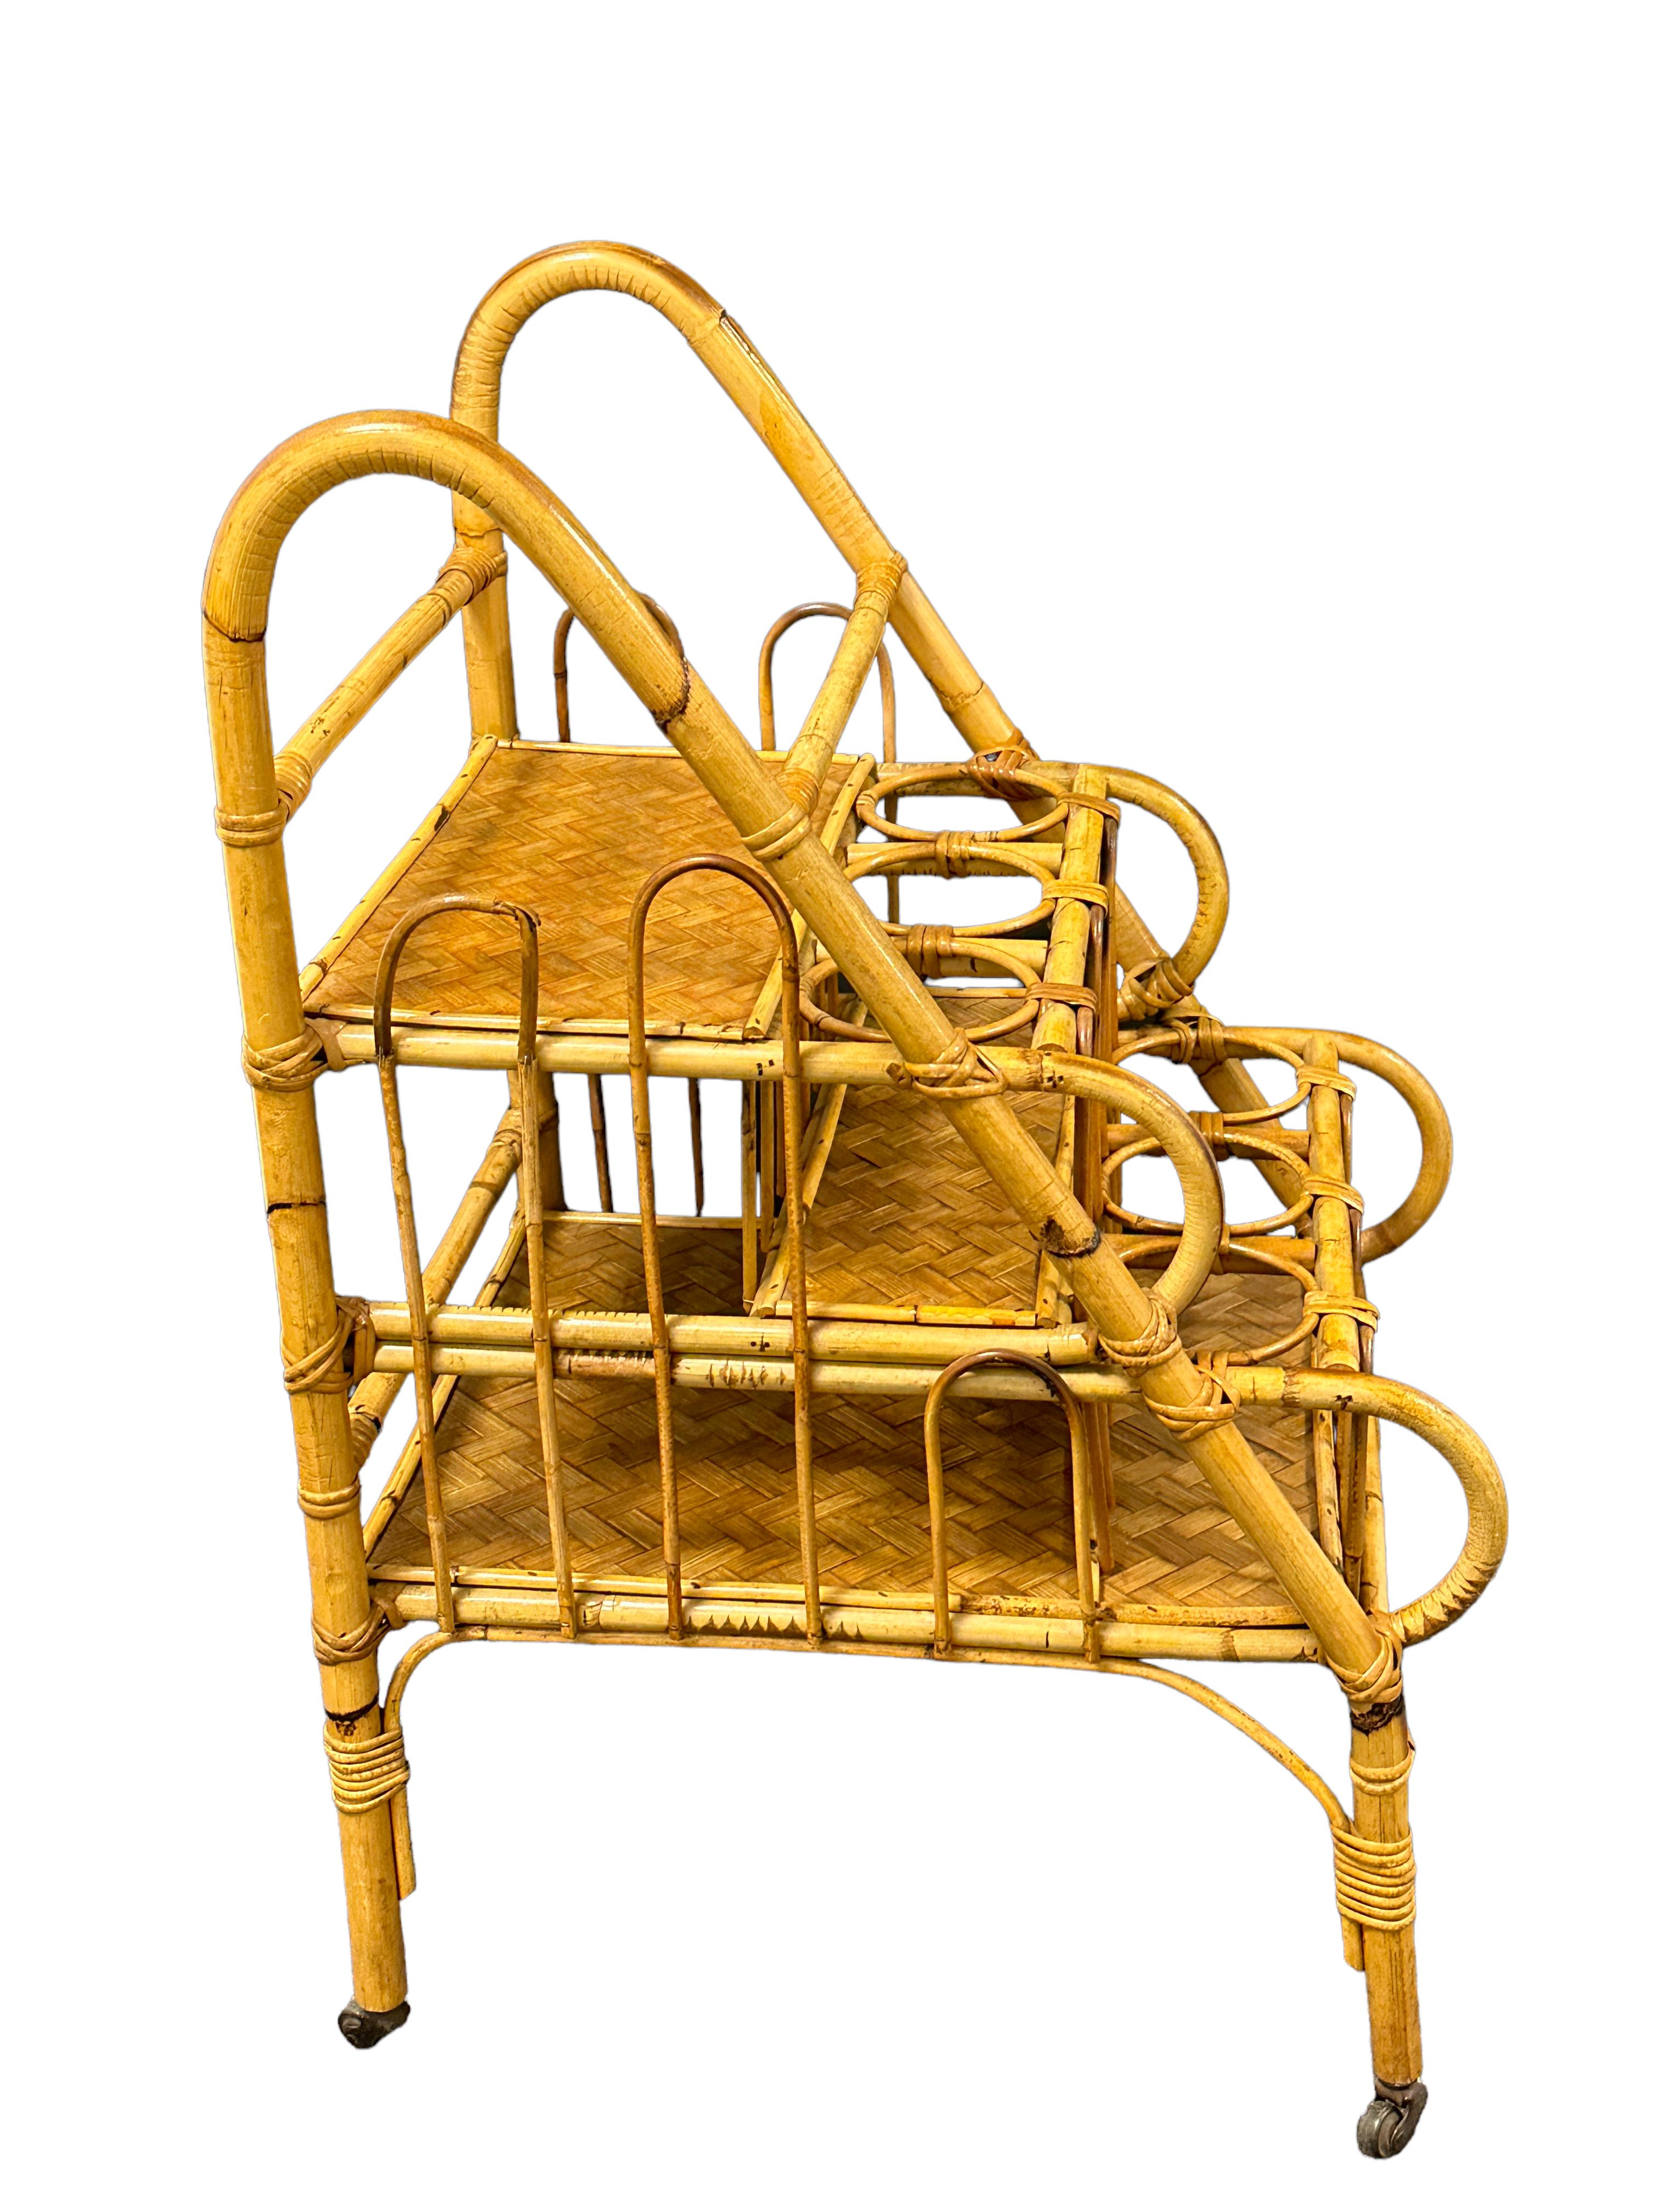 Mid-Century Modern Vivai del Sud Bamboo Wicker Bar Cart Drinks Vine Bottle Stand, Vintage Italy For Sale